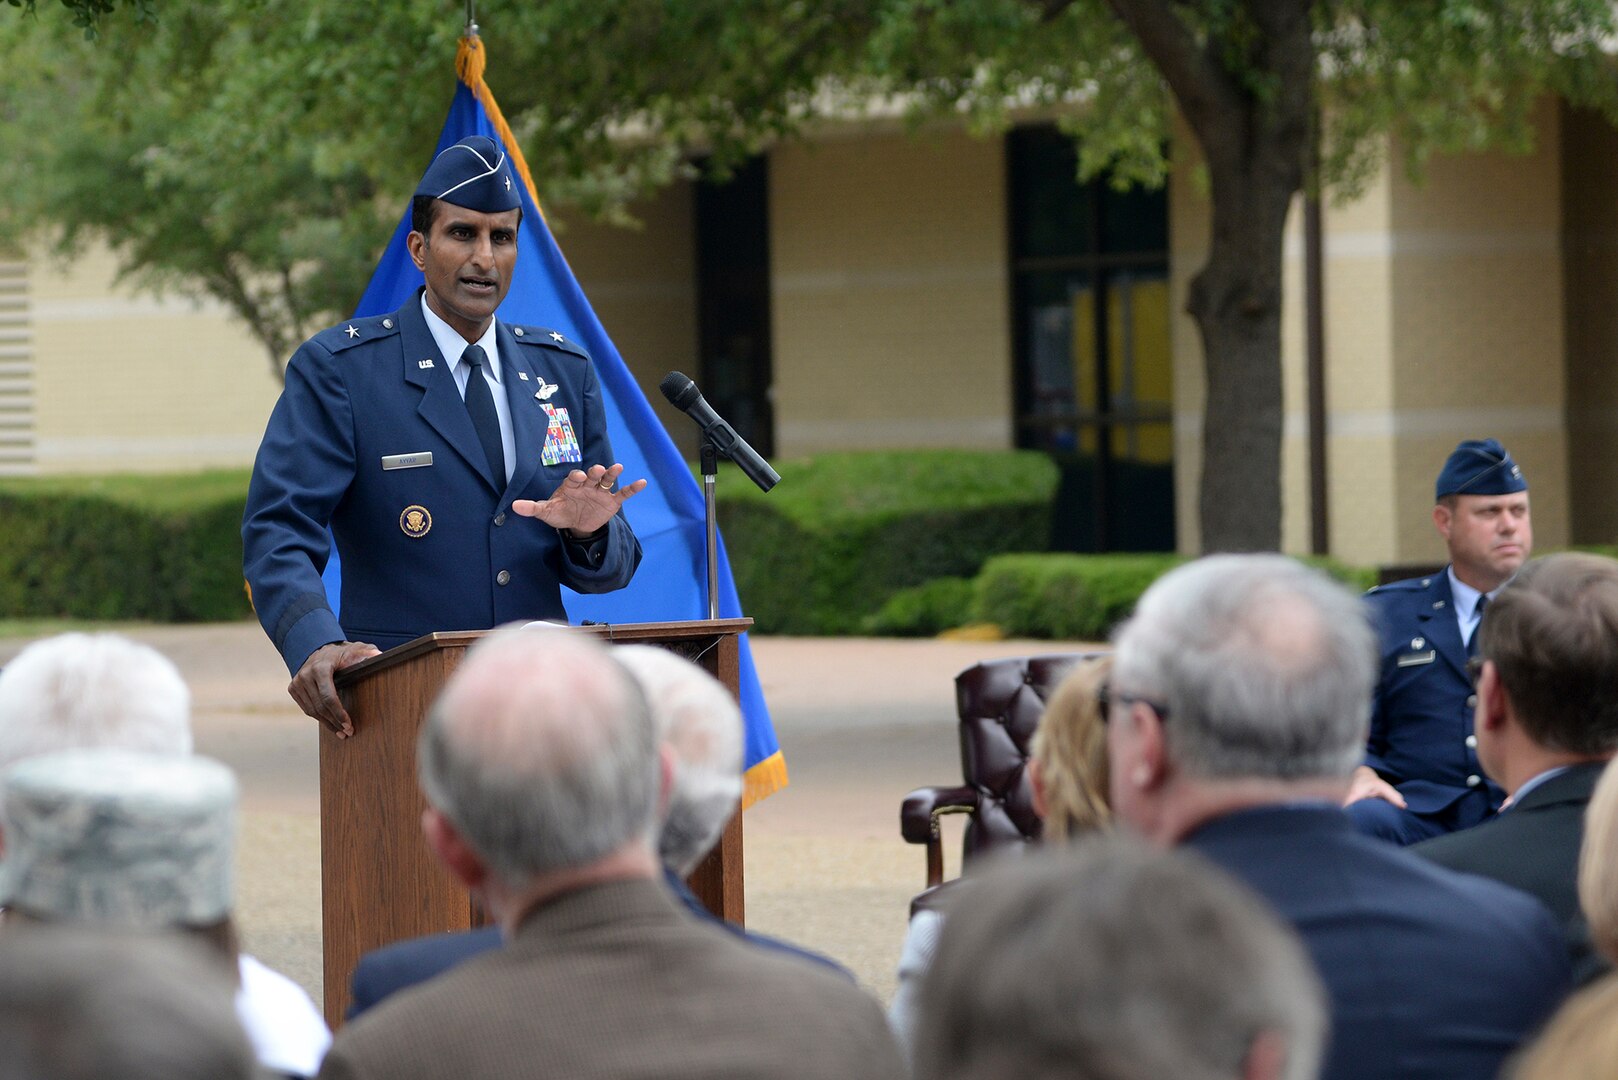 U.S. Air Force Brig. Gen. Balan R. Ayyar, special assistant to the commander, Air Education and Training Command, addresses the audience at the Defense Language Institute English Language Center's 60th anniversary celebration. Ayyar was the guest speaker for the event. (U.S. Air Force photo by Johnny Saldivar/ released)